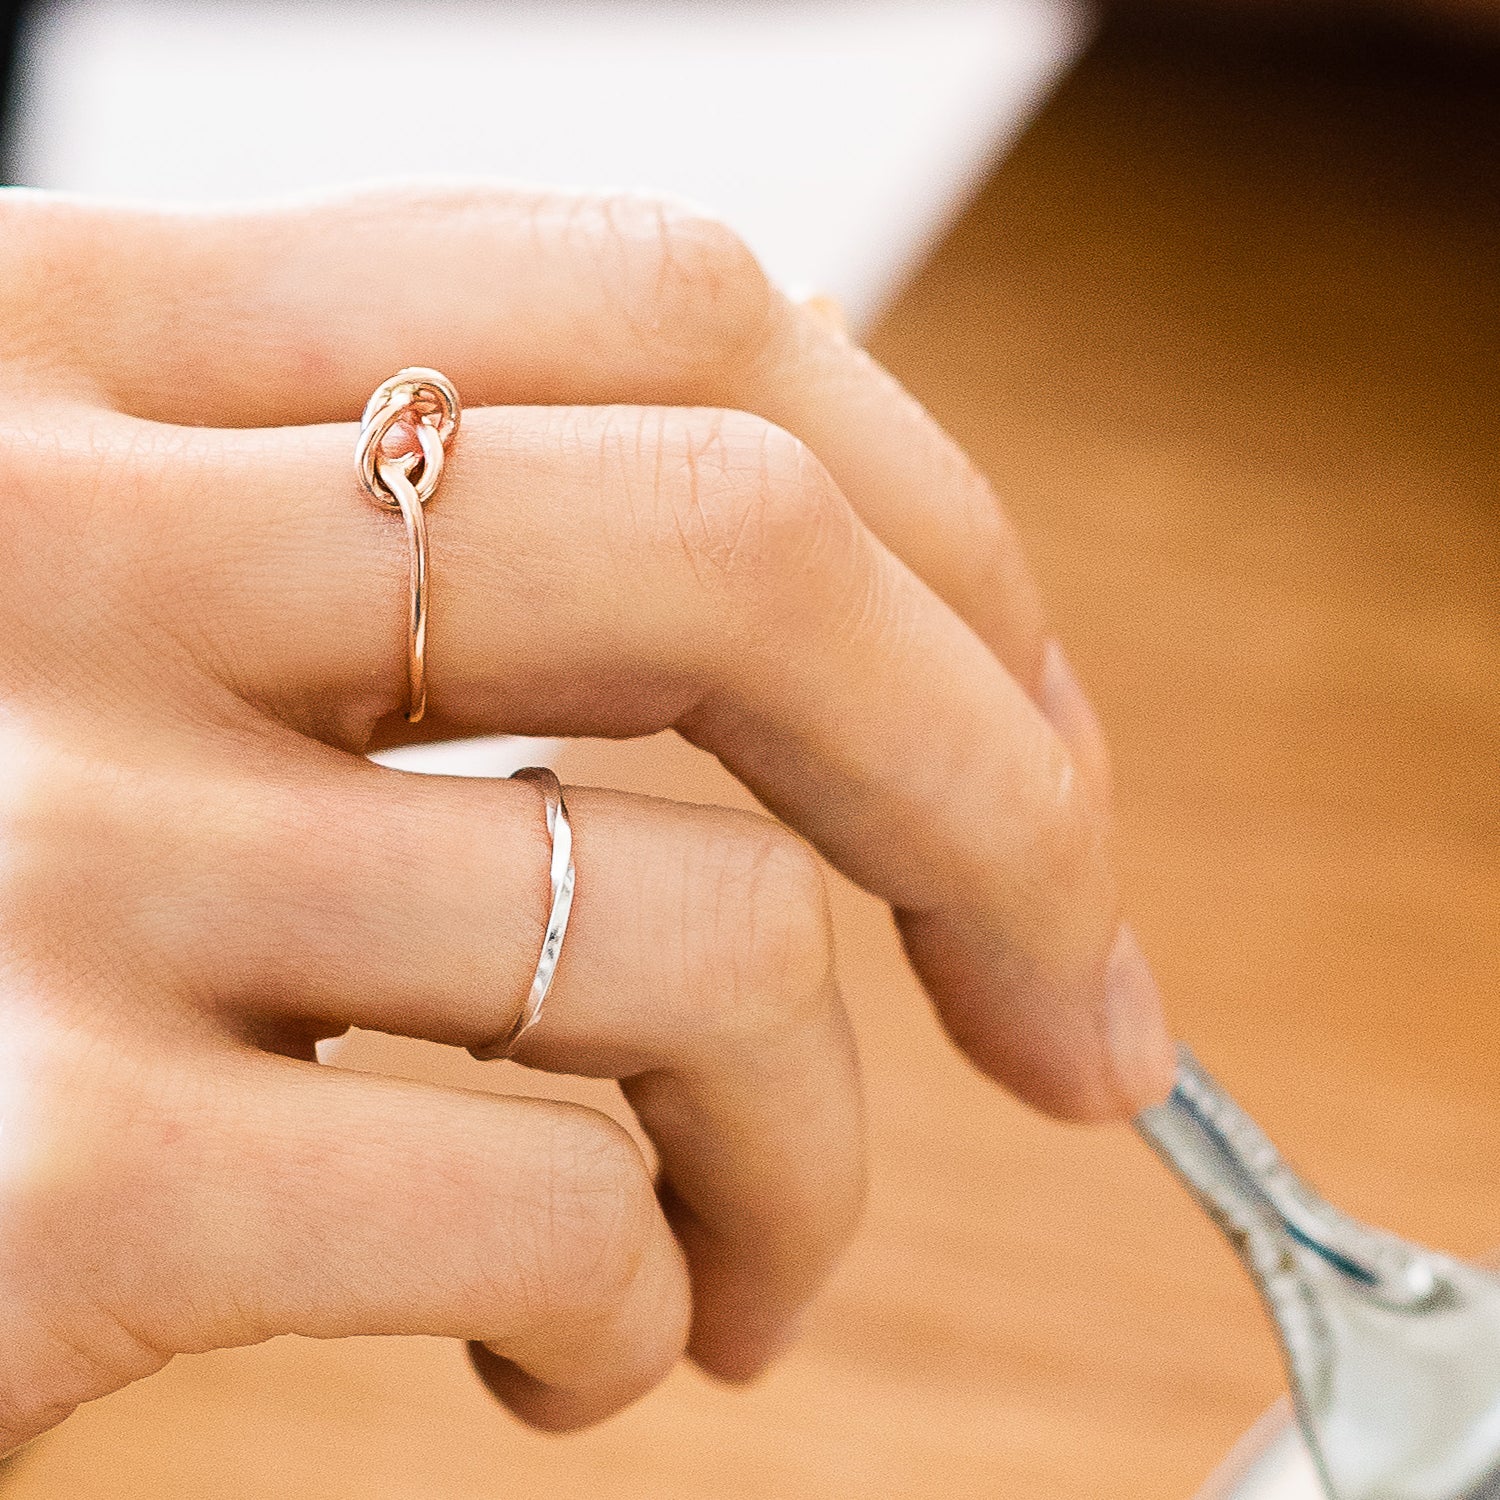 slim rose gold knot ring being worn, hand holding a fork